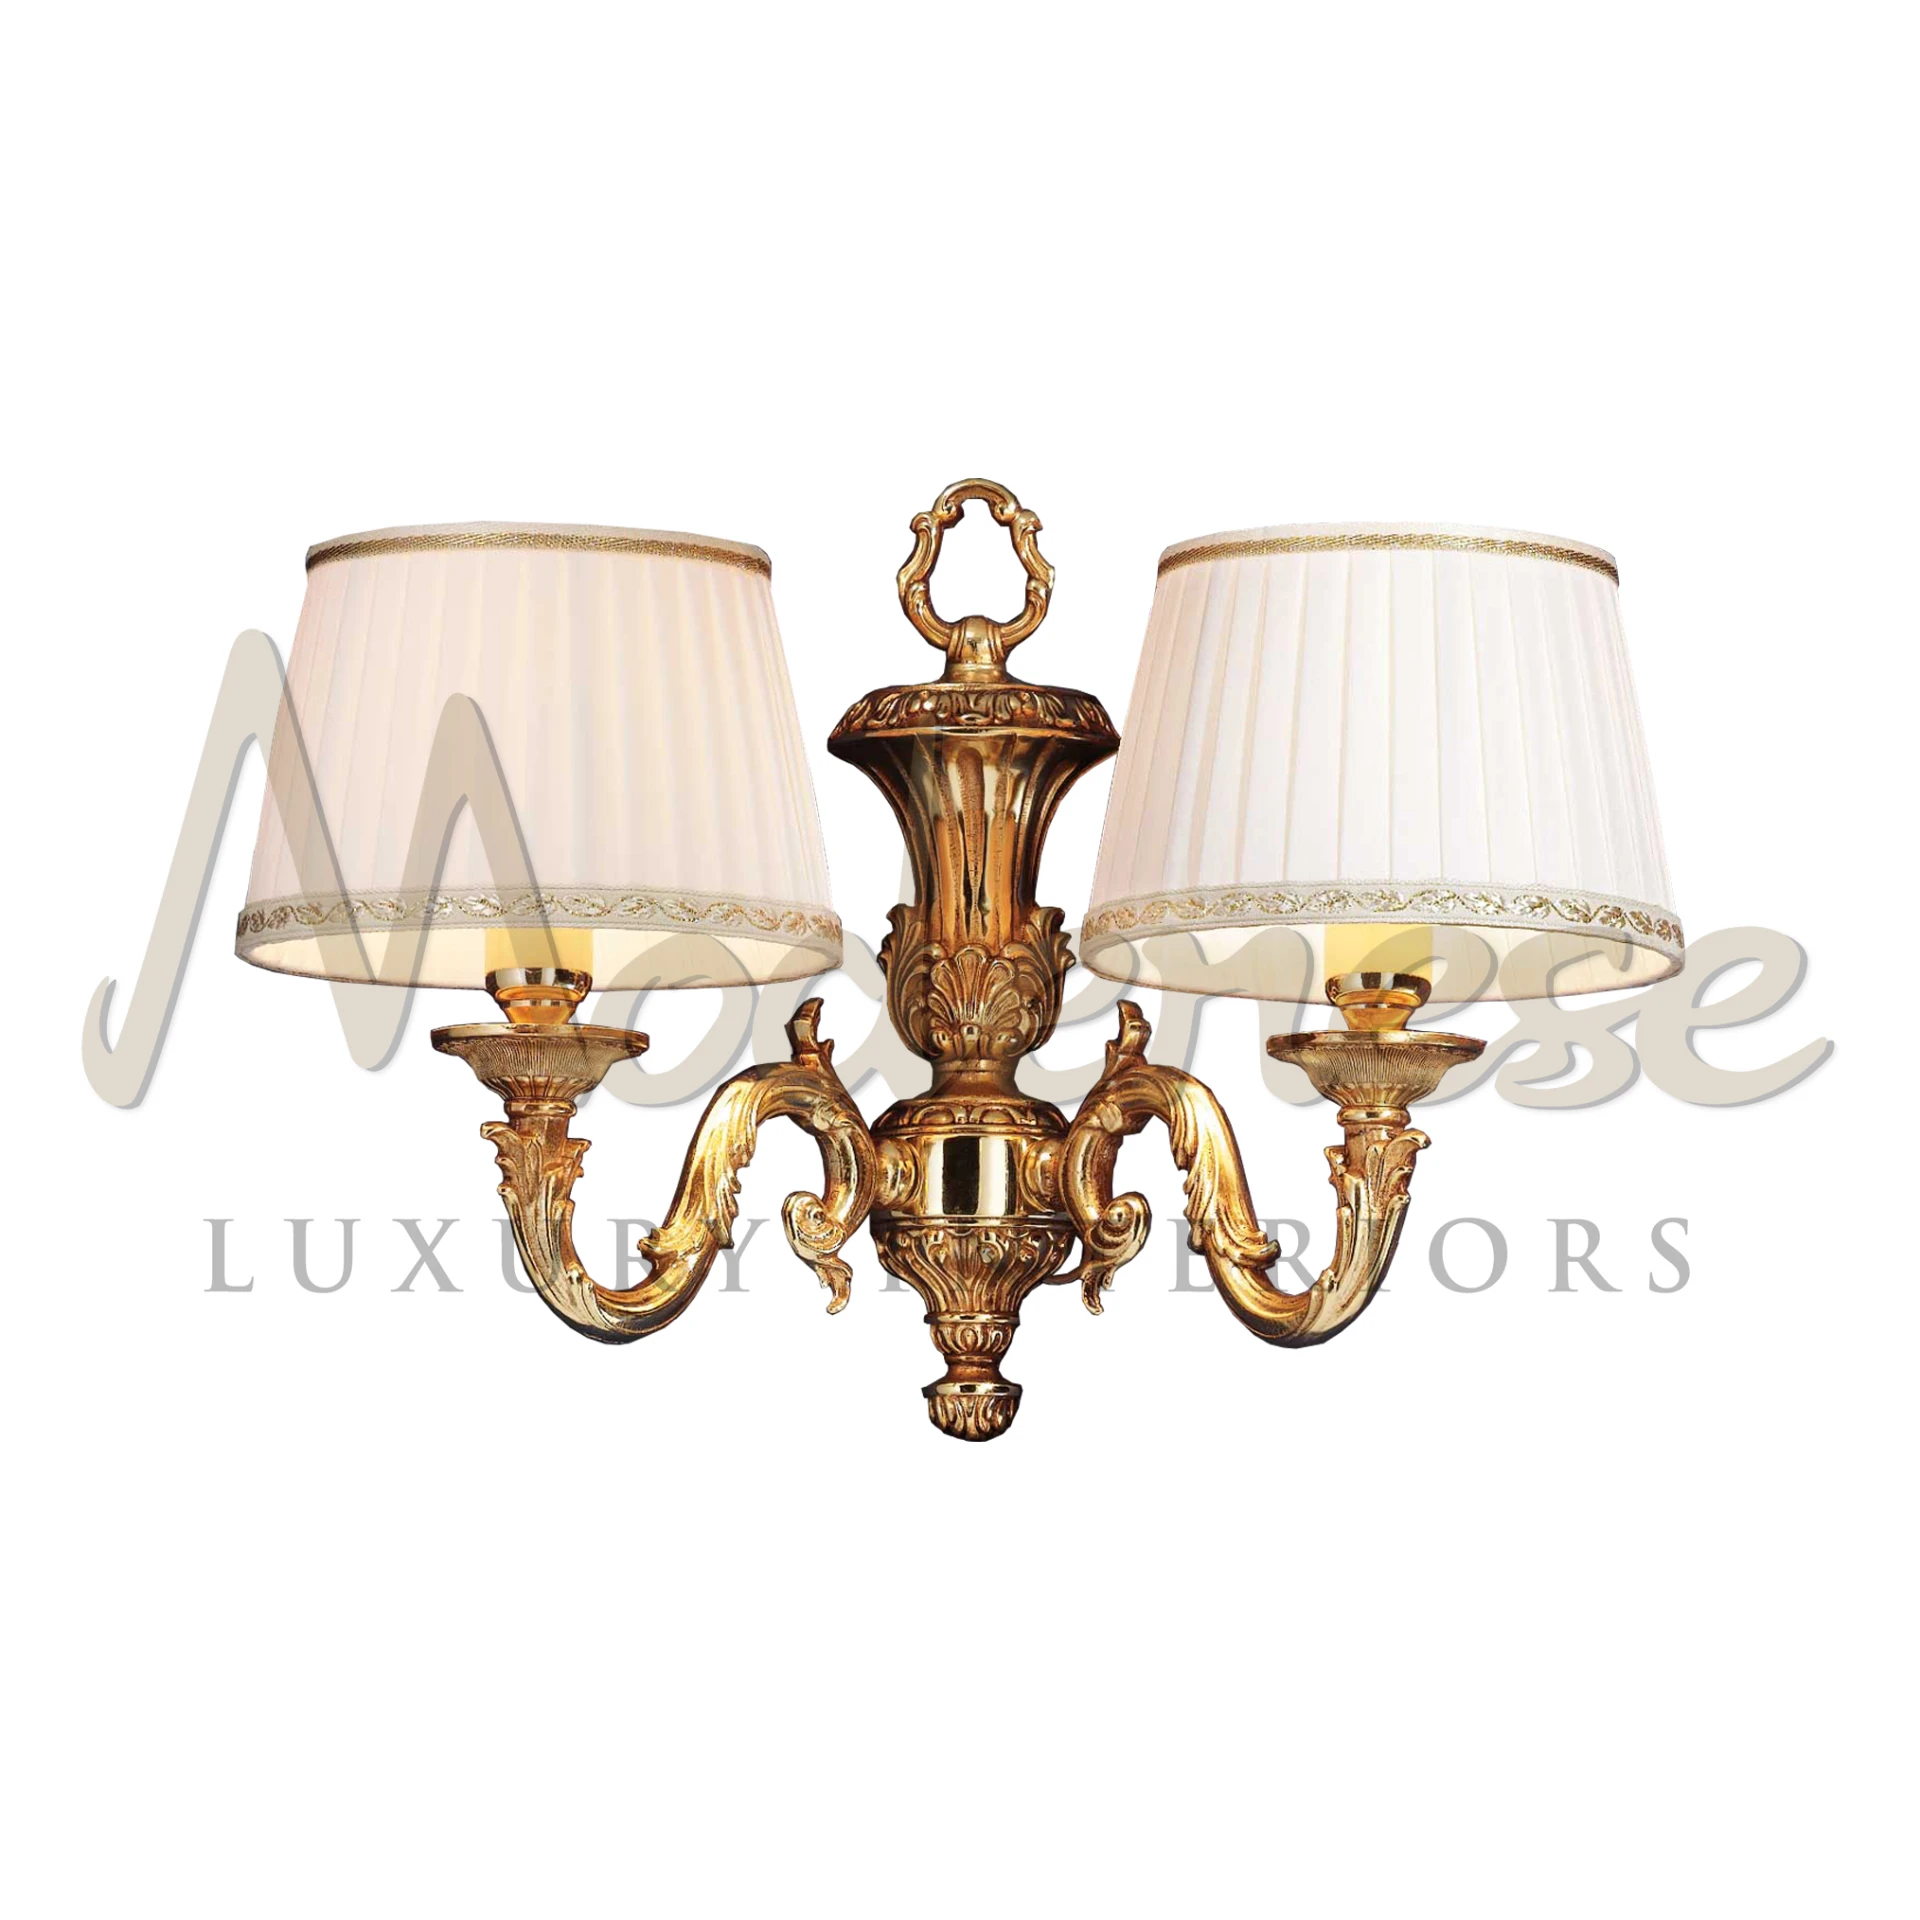 Luxury Italian Art Deco Wall Lamp with dual shades and an antique bronze finish